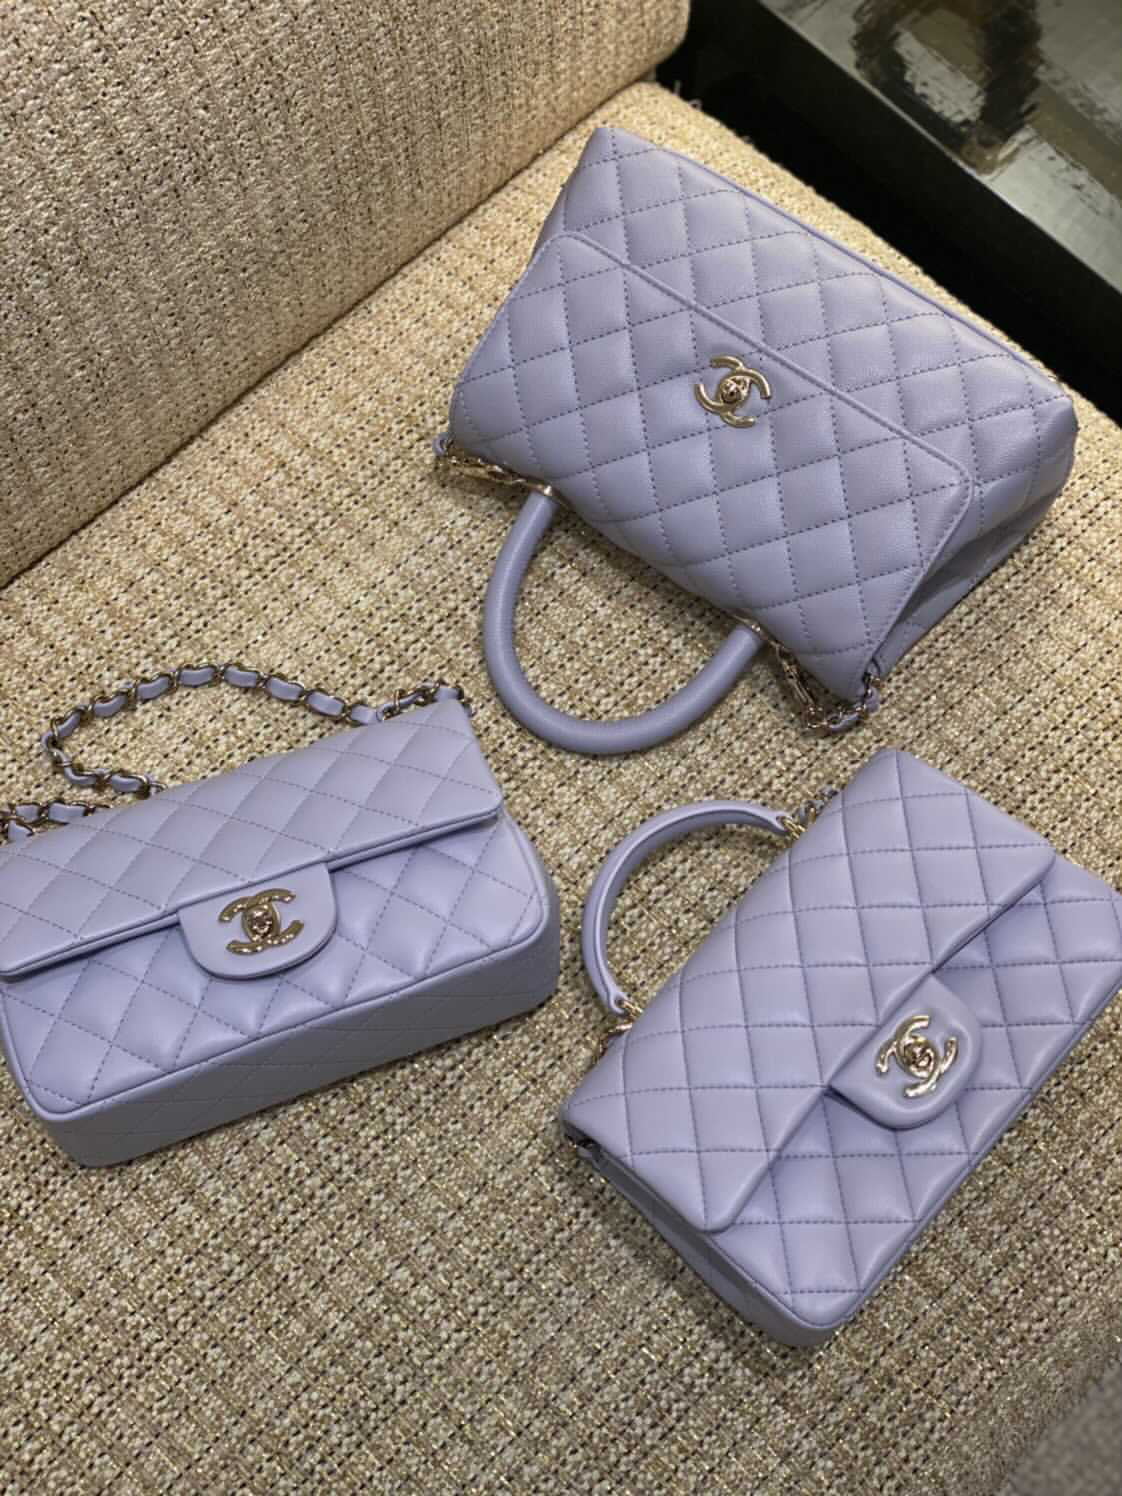 chanel candy bag